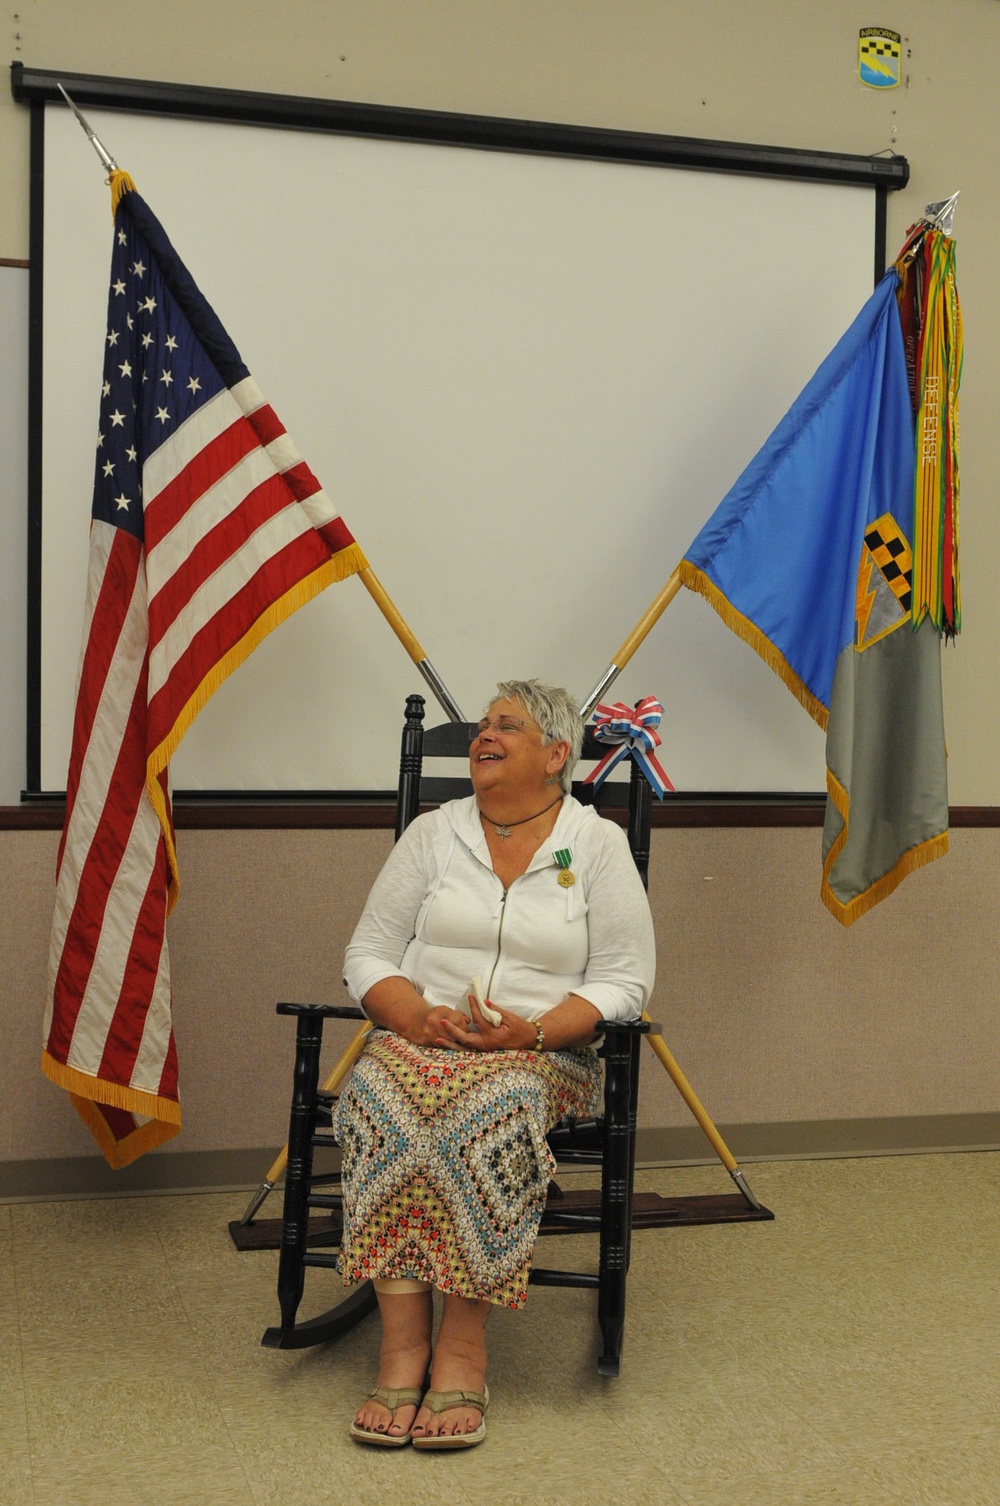 525th Military Intelligence Brigade Family Readiness Support Assistant retires